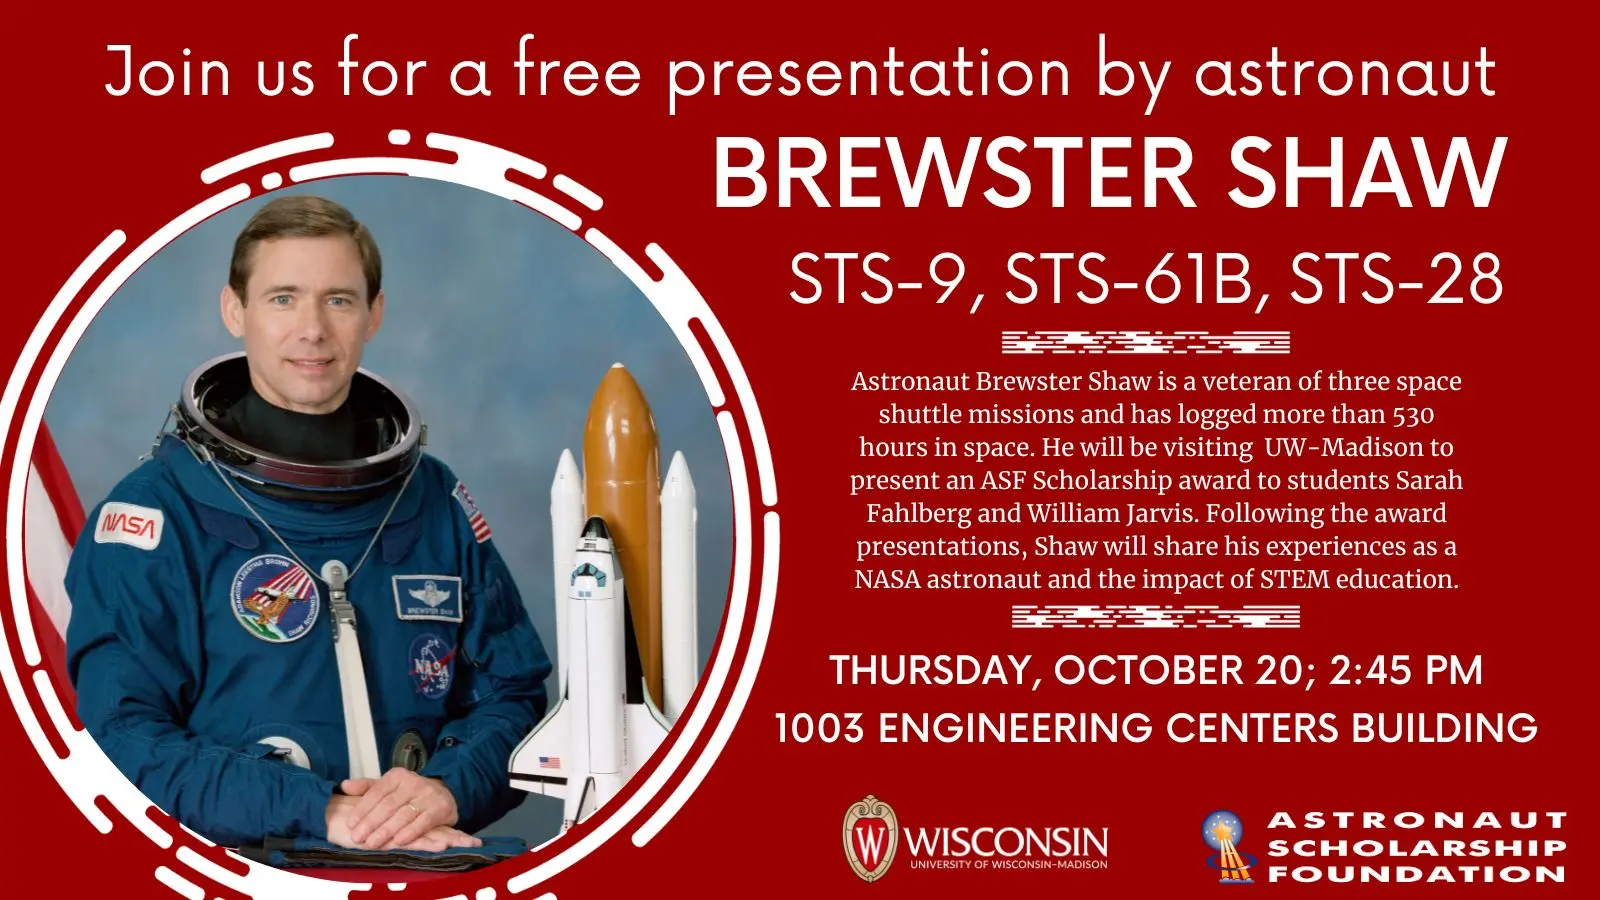 astronaut Brewster Shaw; Text reads "Join us for a free presentation by astronaut Brewster Shaw, STS-9, STS-61B, STS-28; Astronaut Brewster Shaw is a veteran of three space shuttle missions and has logged more than 530 hours in space. He will be visiting UW-Madison to present an ASF Scholarship award to students Sarah Fahlberg and William Jarvis. Following the award presentations, Shaw will share his experiences as a NASA astronaut and the impact of STEM education.; Thursday, October 20; 2:45 PM; 1003 Engineering Centers Building"